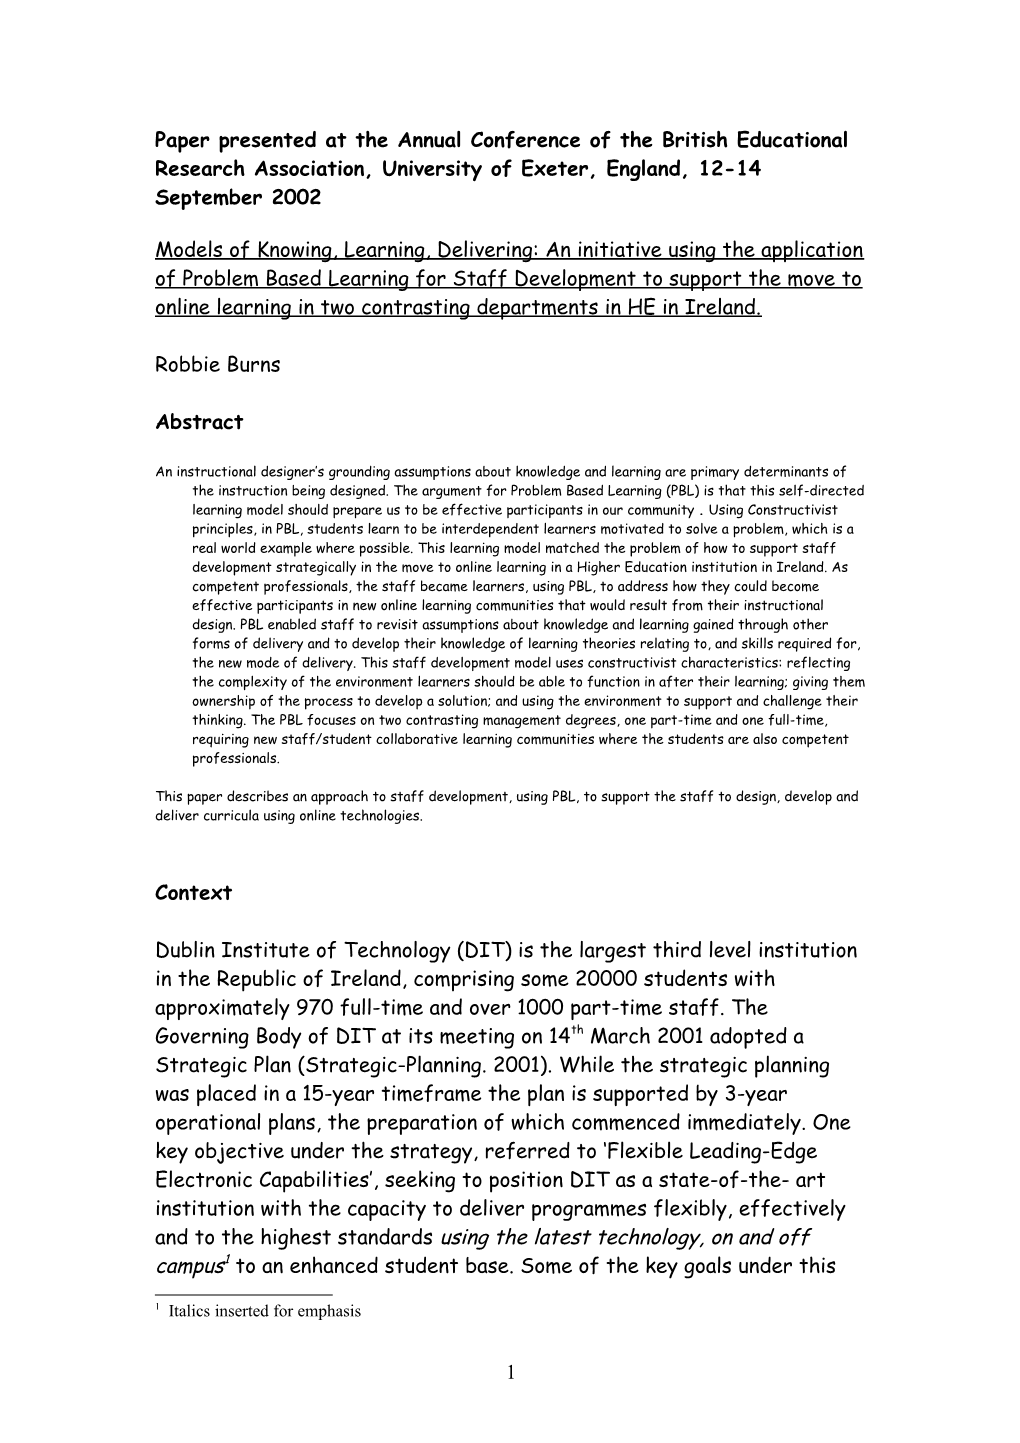 Paper Presented at the Annual Conference of the British Educational Research Association